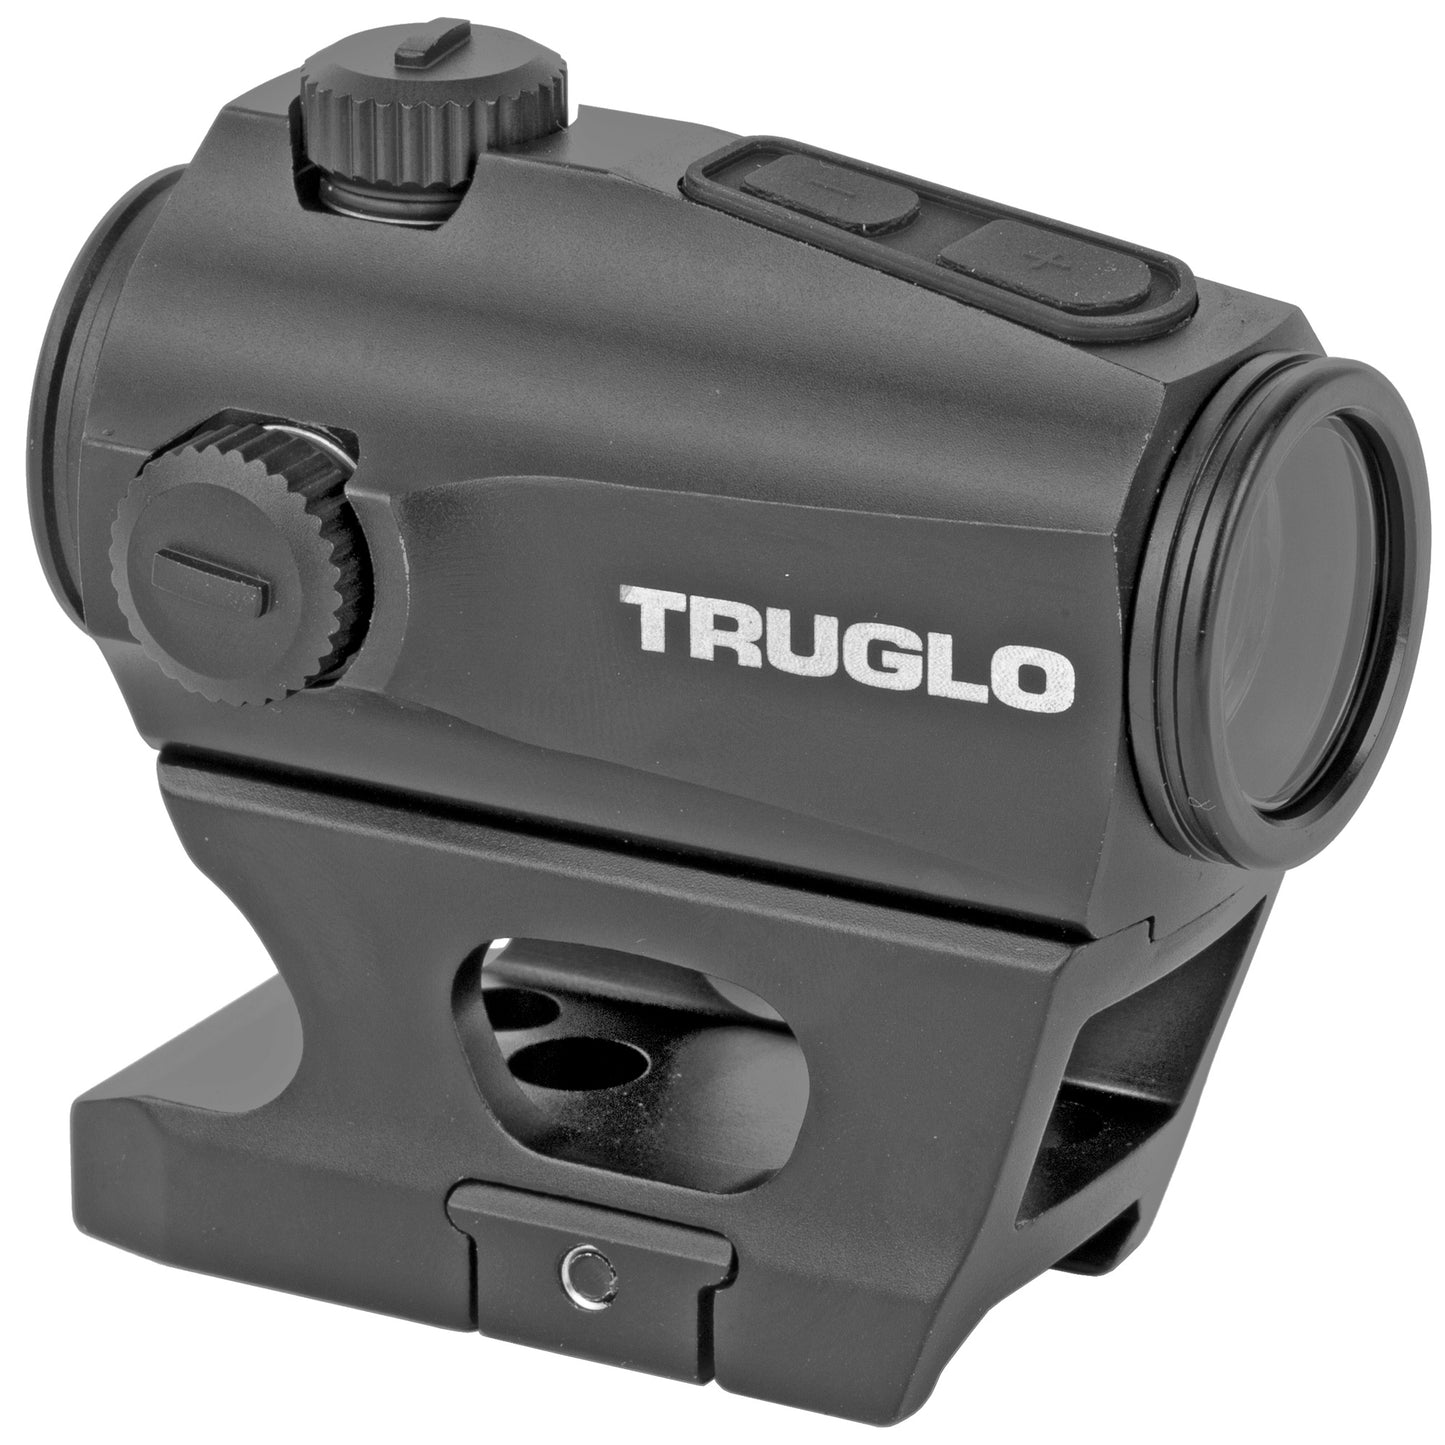 Truglo, IGNITE, Red Dot, 1X22mm, 2 MOA Green Dot, Black, Includes High and Low Picatinny/Weaver Mount and Rubber Lens Cover